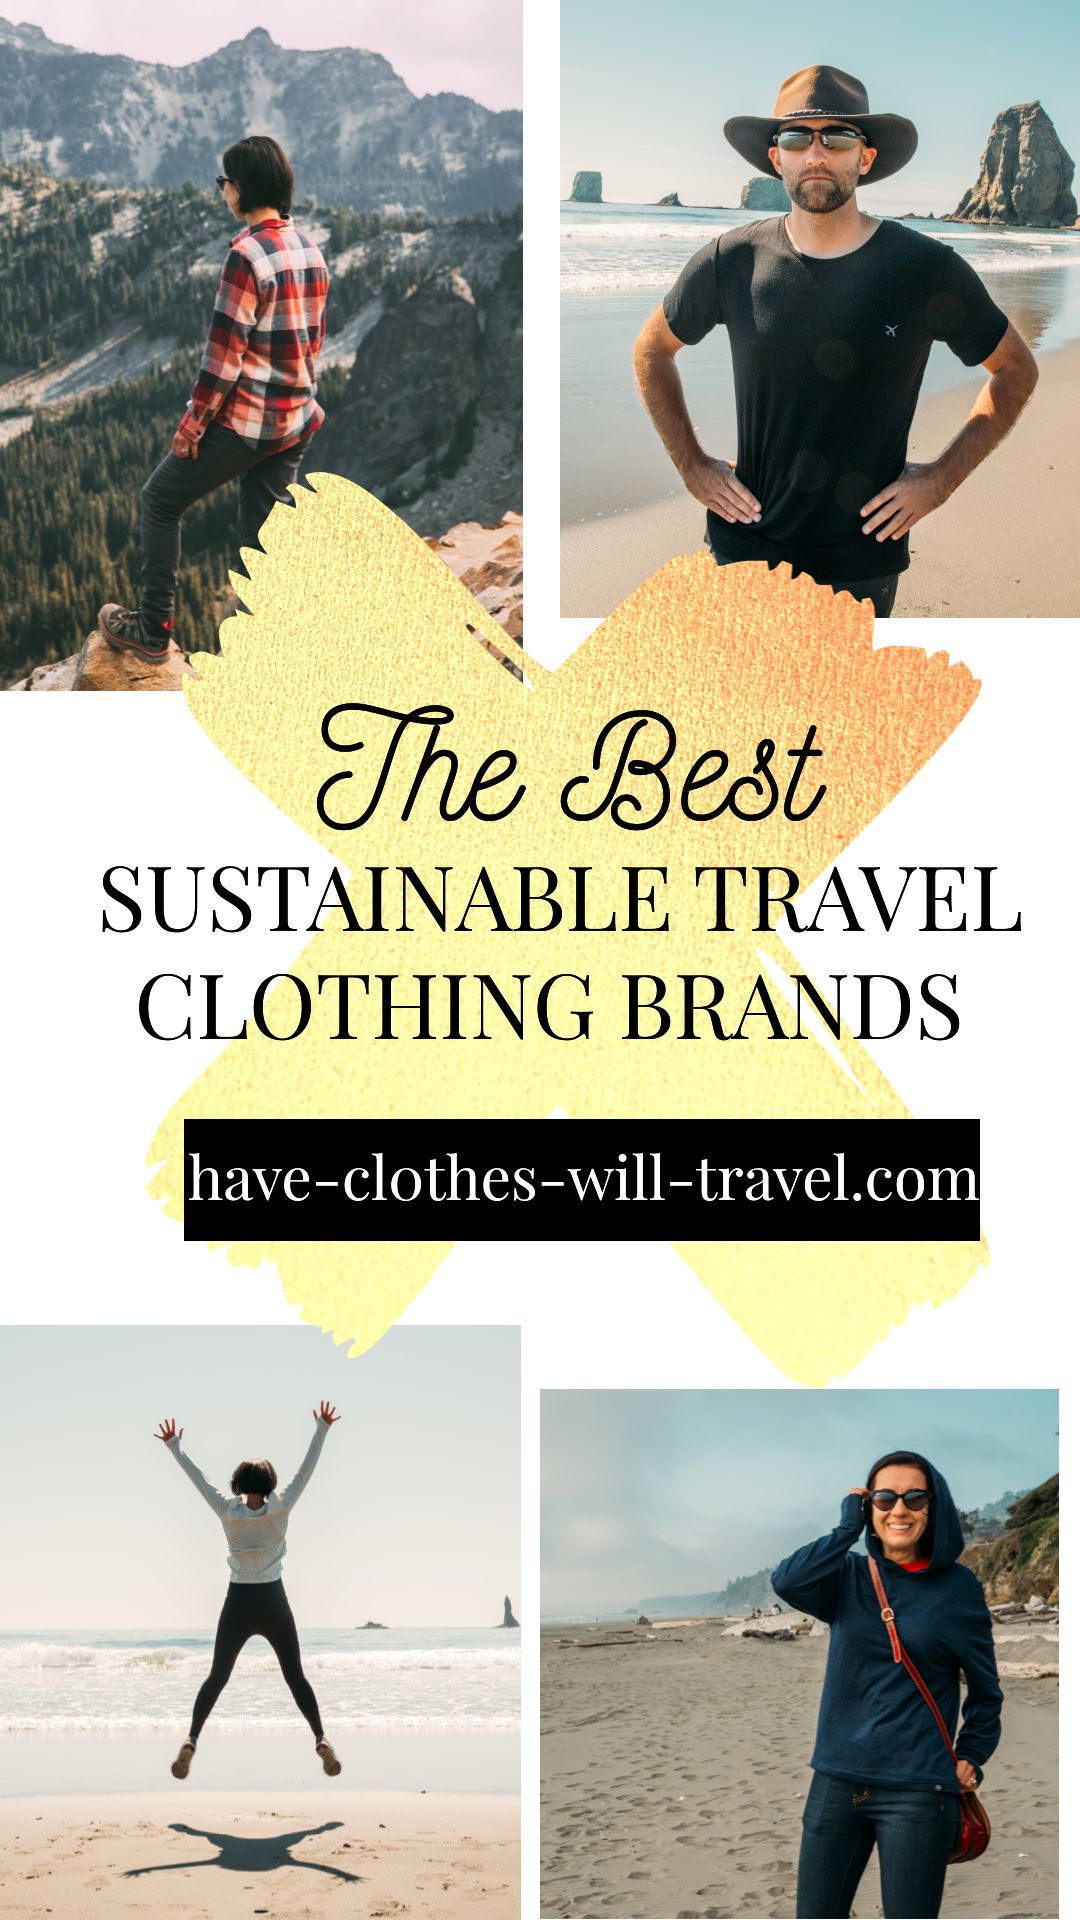 A collage of four images of a man and woman on their travels, modeling their sustainably-made outfits. Text in the center of the graphic says, "the best sustainable travel clothing brands"